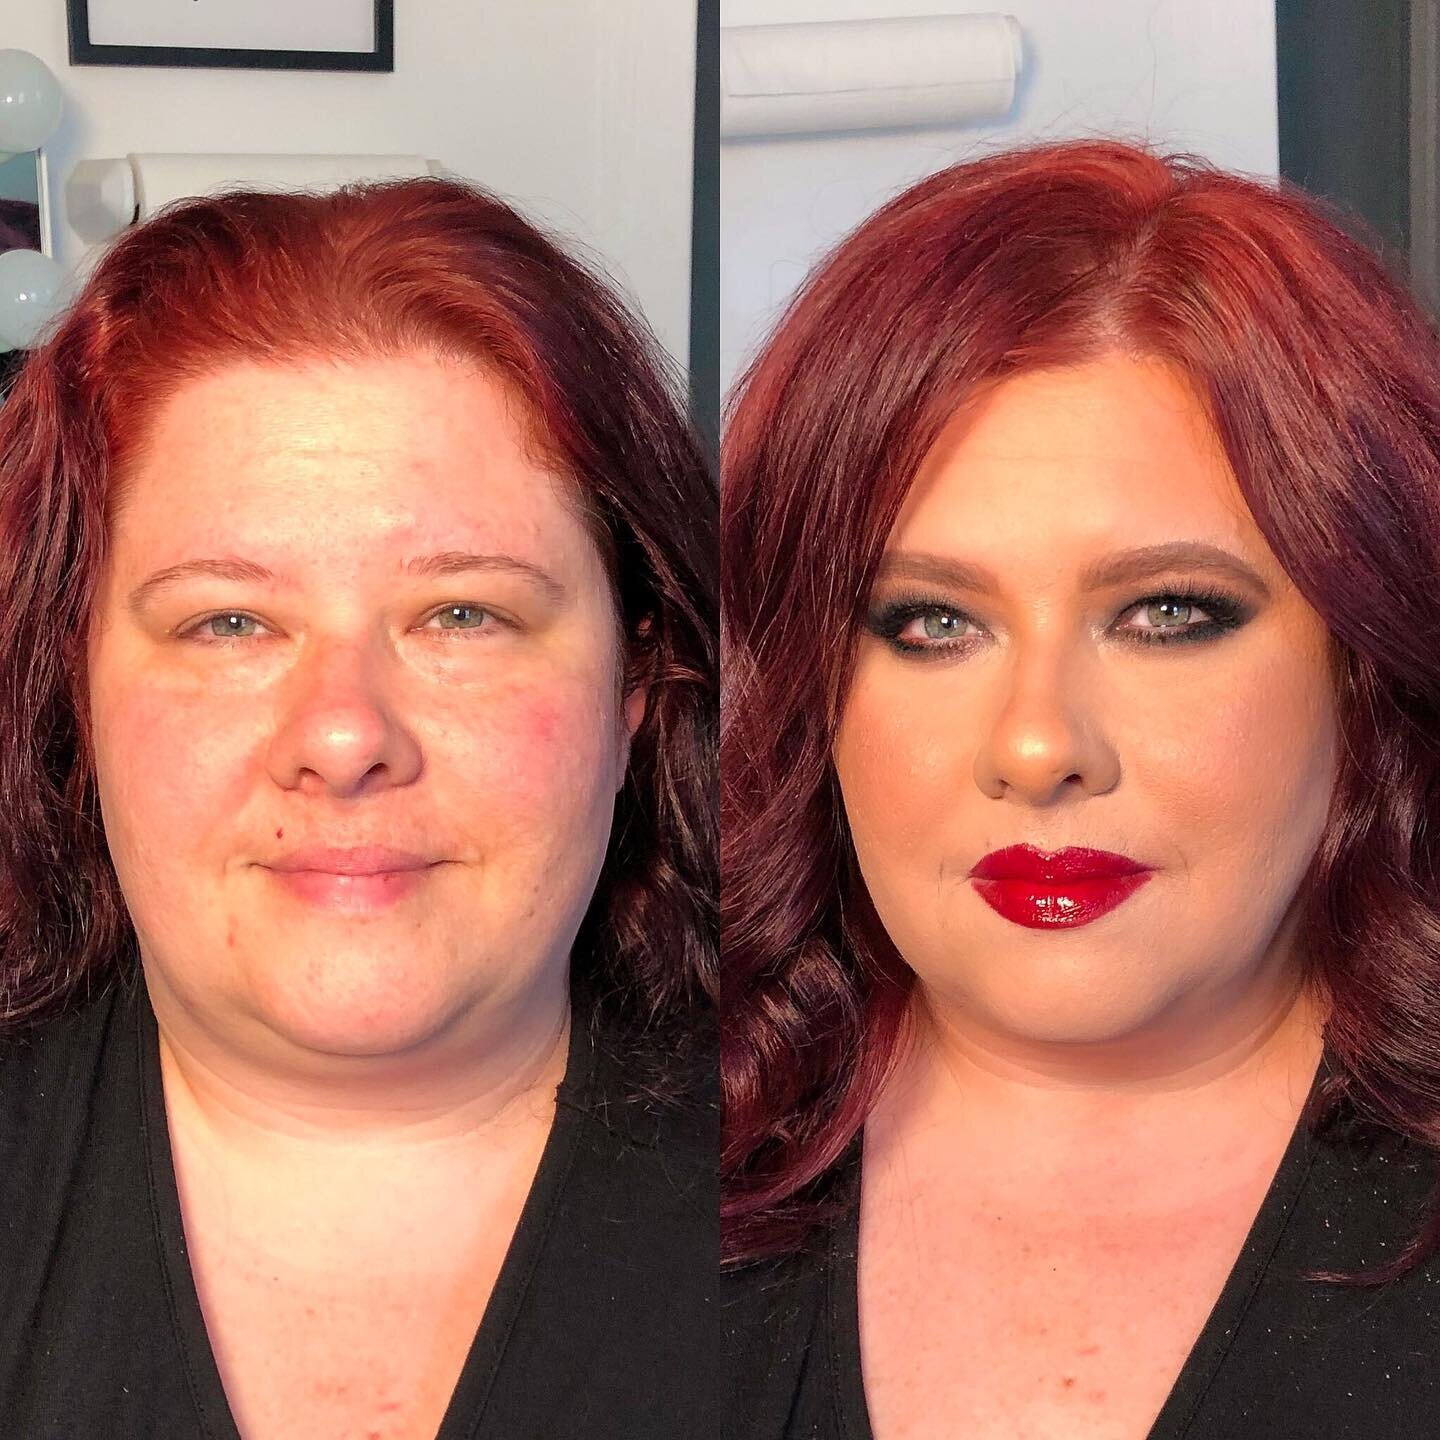 &ldquo;I like my eyes black, like gothic black and I love a red lip to go with my red hair&rdquo; you got it 👍🏼
.
.
.
.
.
.
.
.
.
.
.
.
.
.
.
.
.
.
.
.
.
.
.

#beforeandaftermakeup#makeupbeforeandafter#makeupbeforeafter#nashvillemakeupartist#nashvi